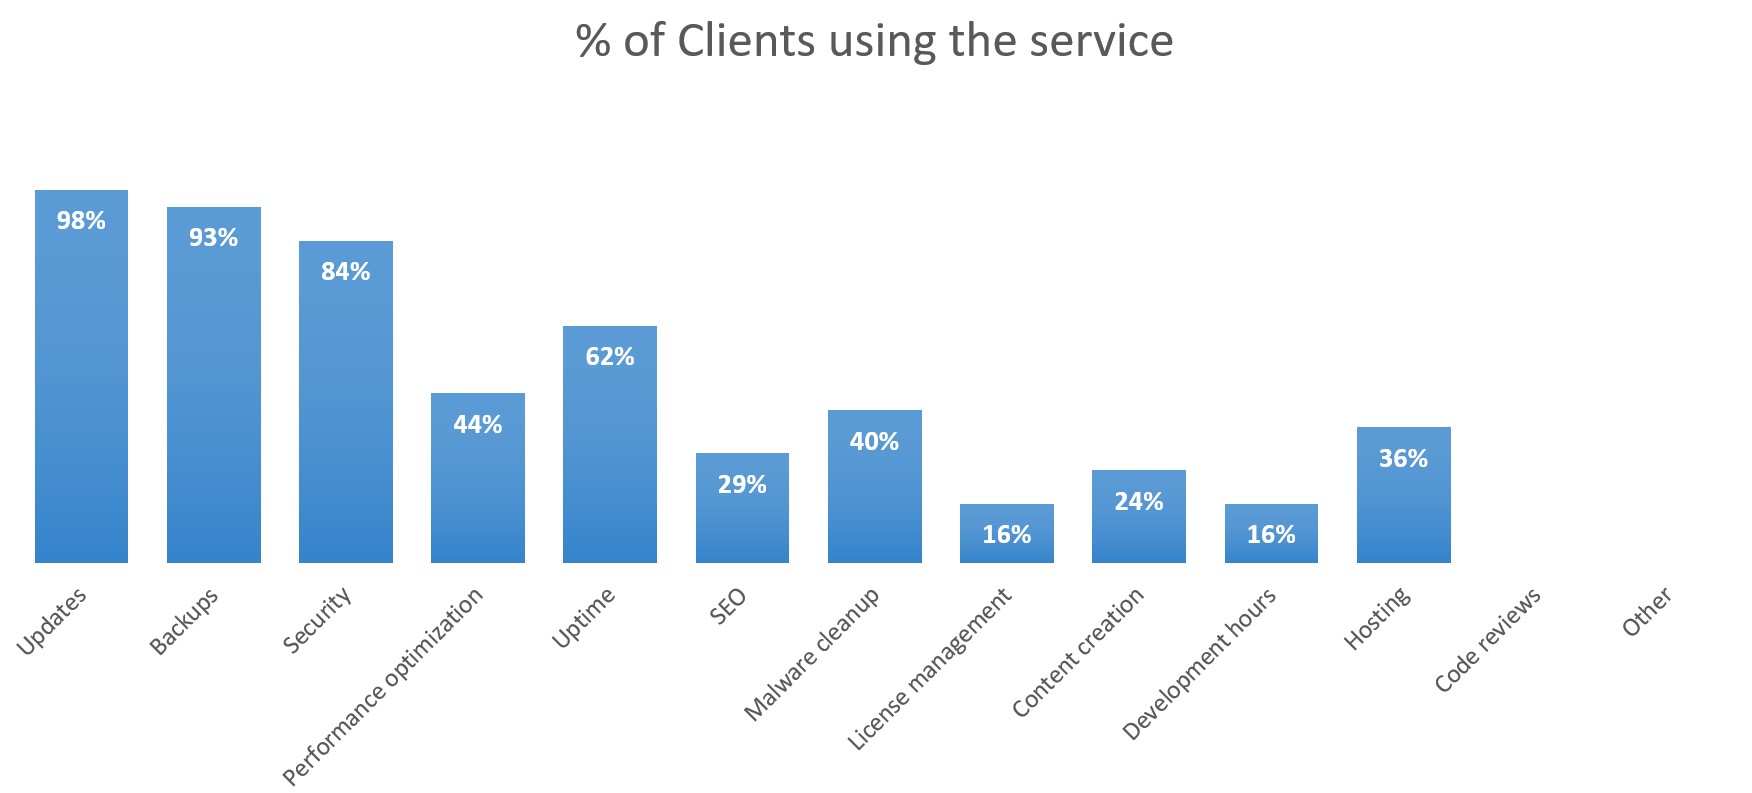 Single tier: Percentage of clients using the service